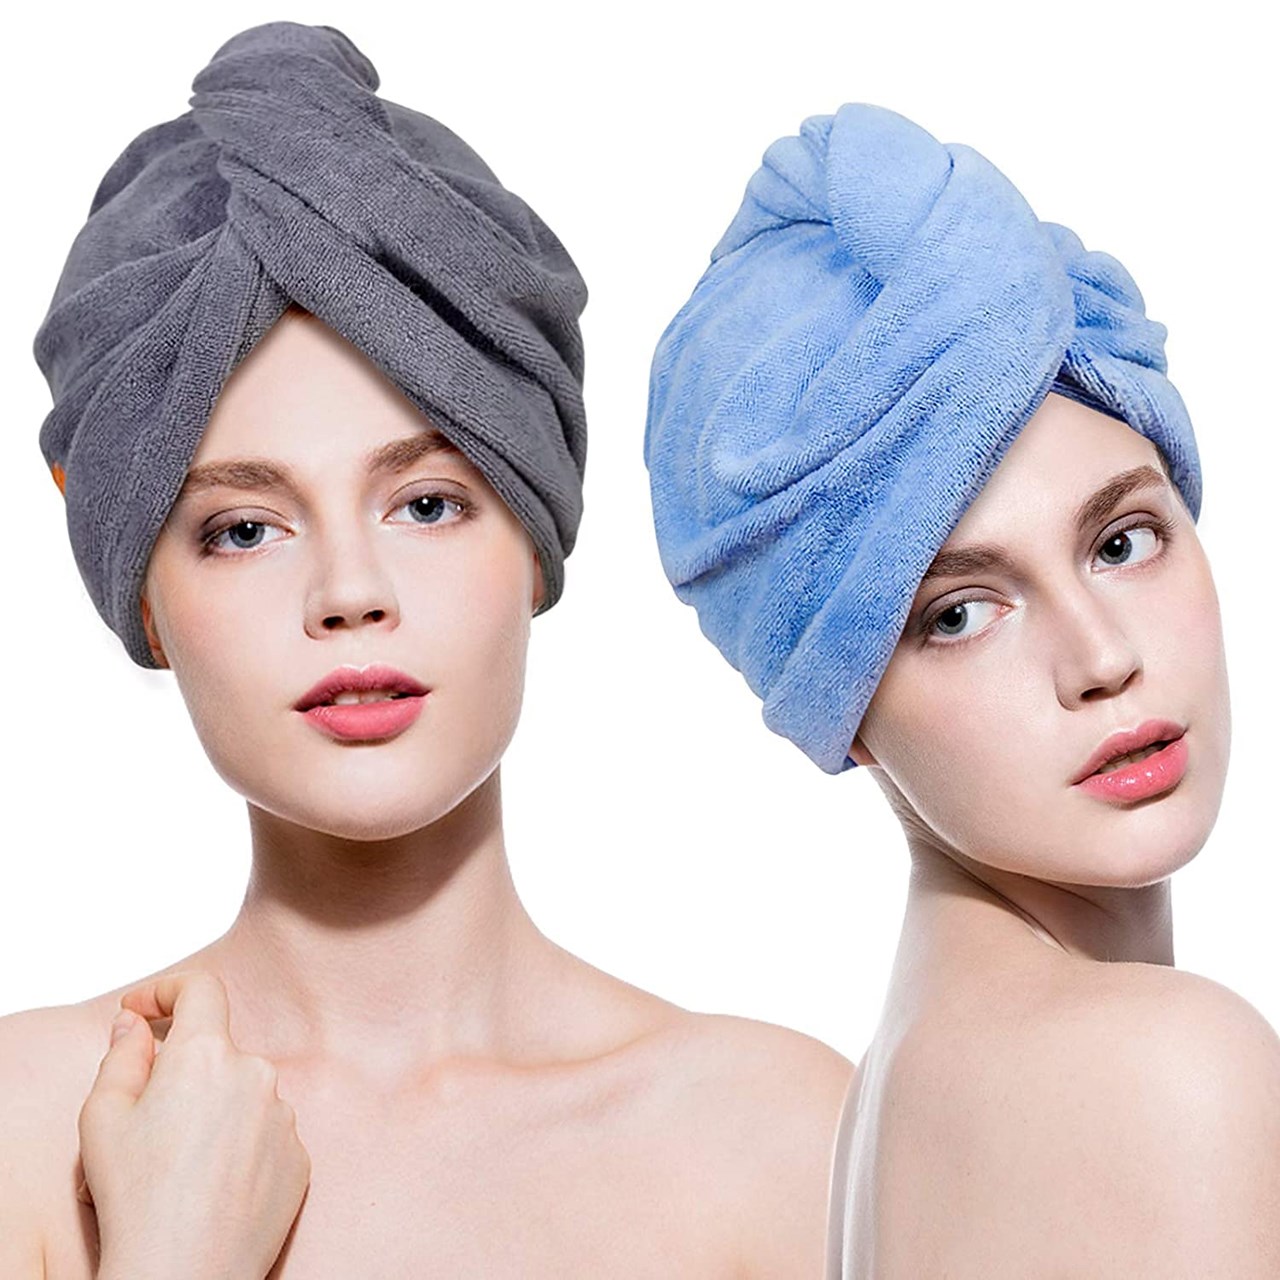 Picture of Surat Dream 2 Pieces Microfiber Hair Towel Wrap For Women For Long Hair Quick Drying Anti Frizz Super Absorbent Turban Dry Shower Caps (26 X 11 inch, Grey + Blue)